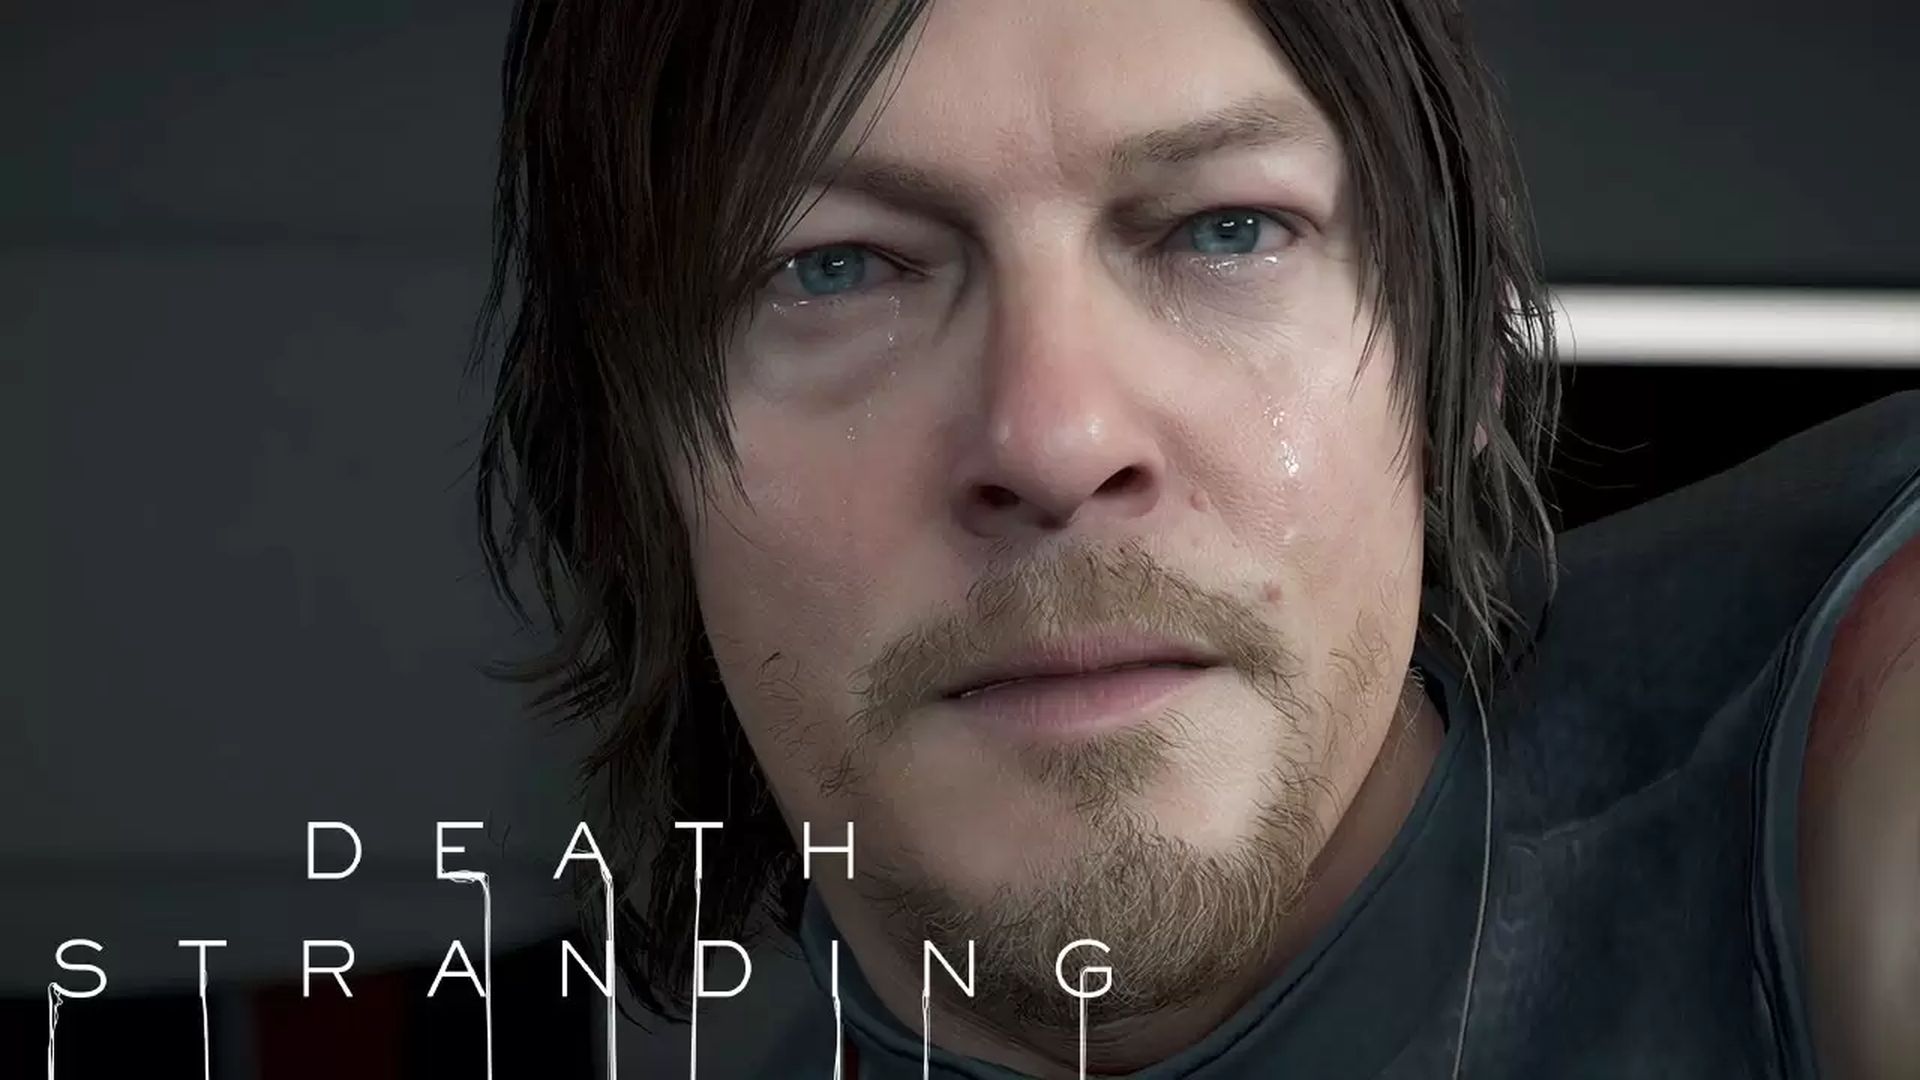 Death Stranding will be available on PC Game Pass on August 23rd